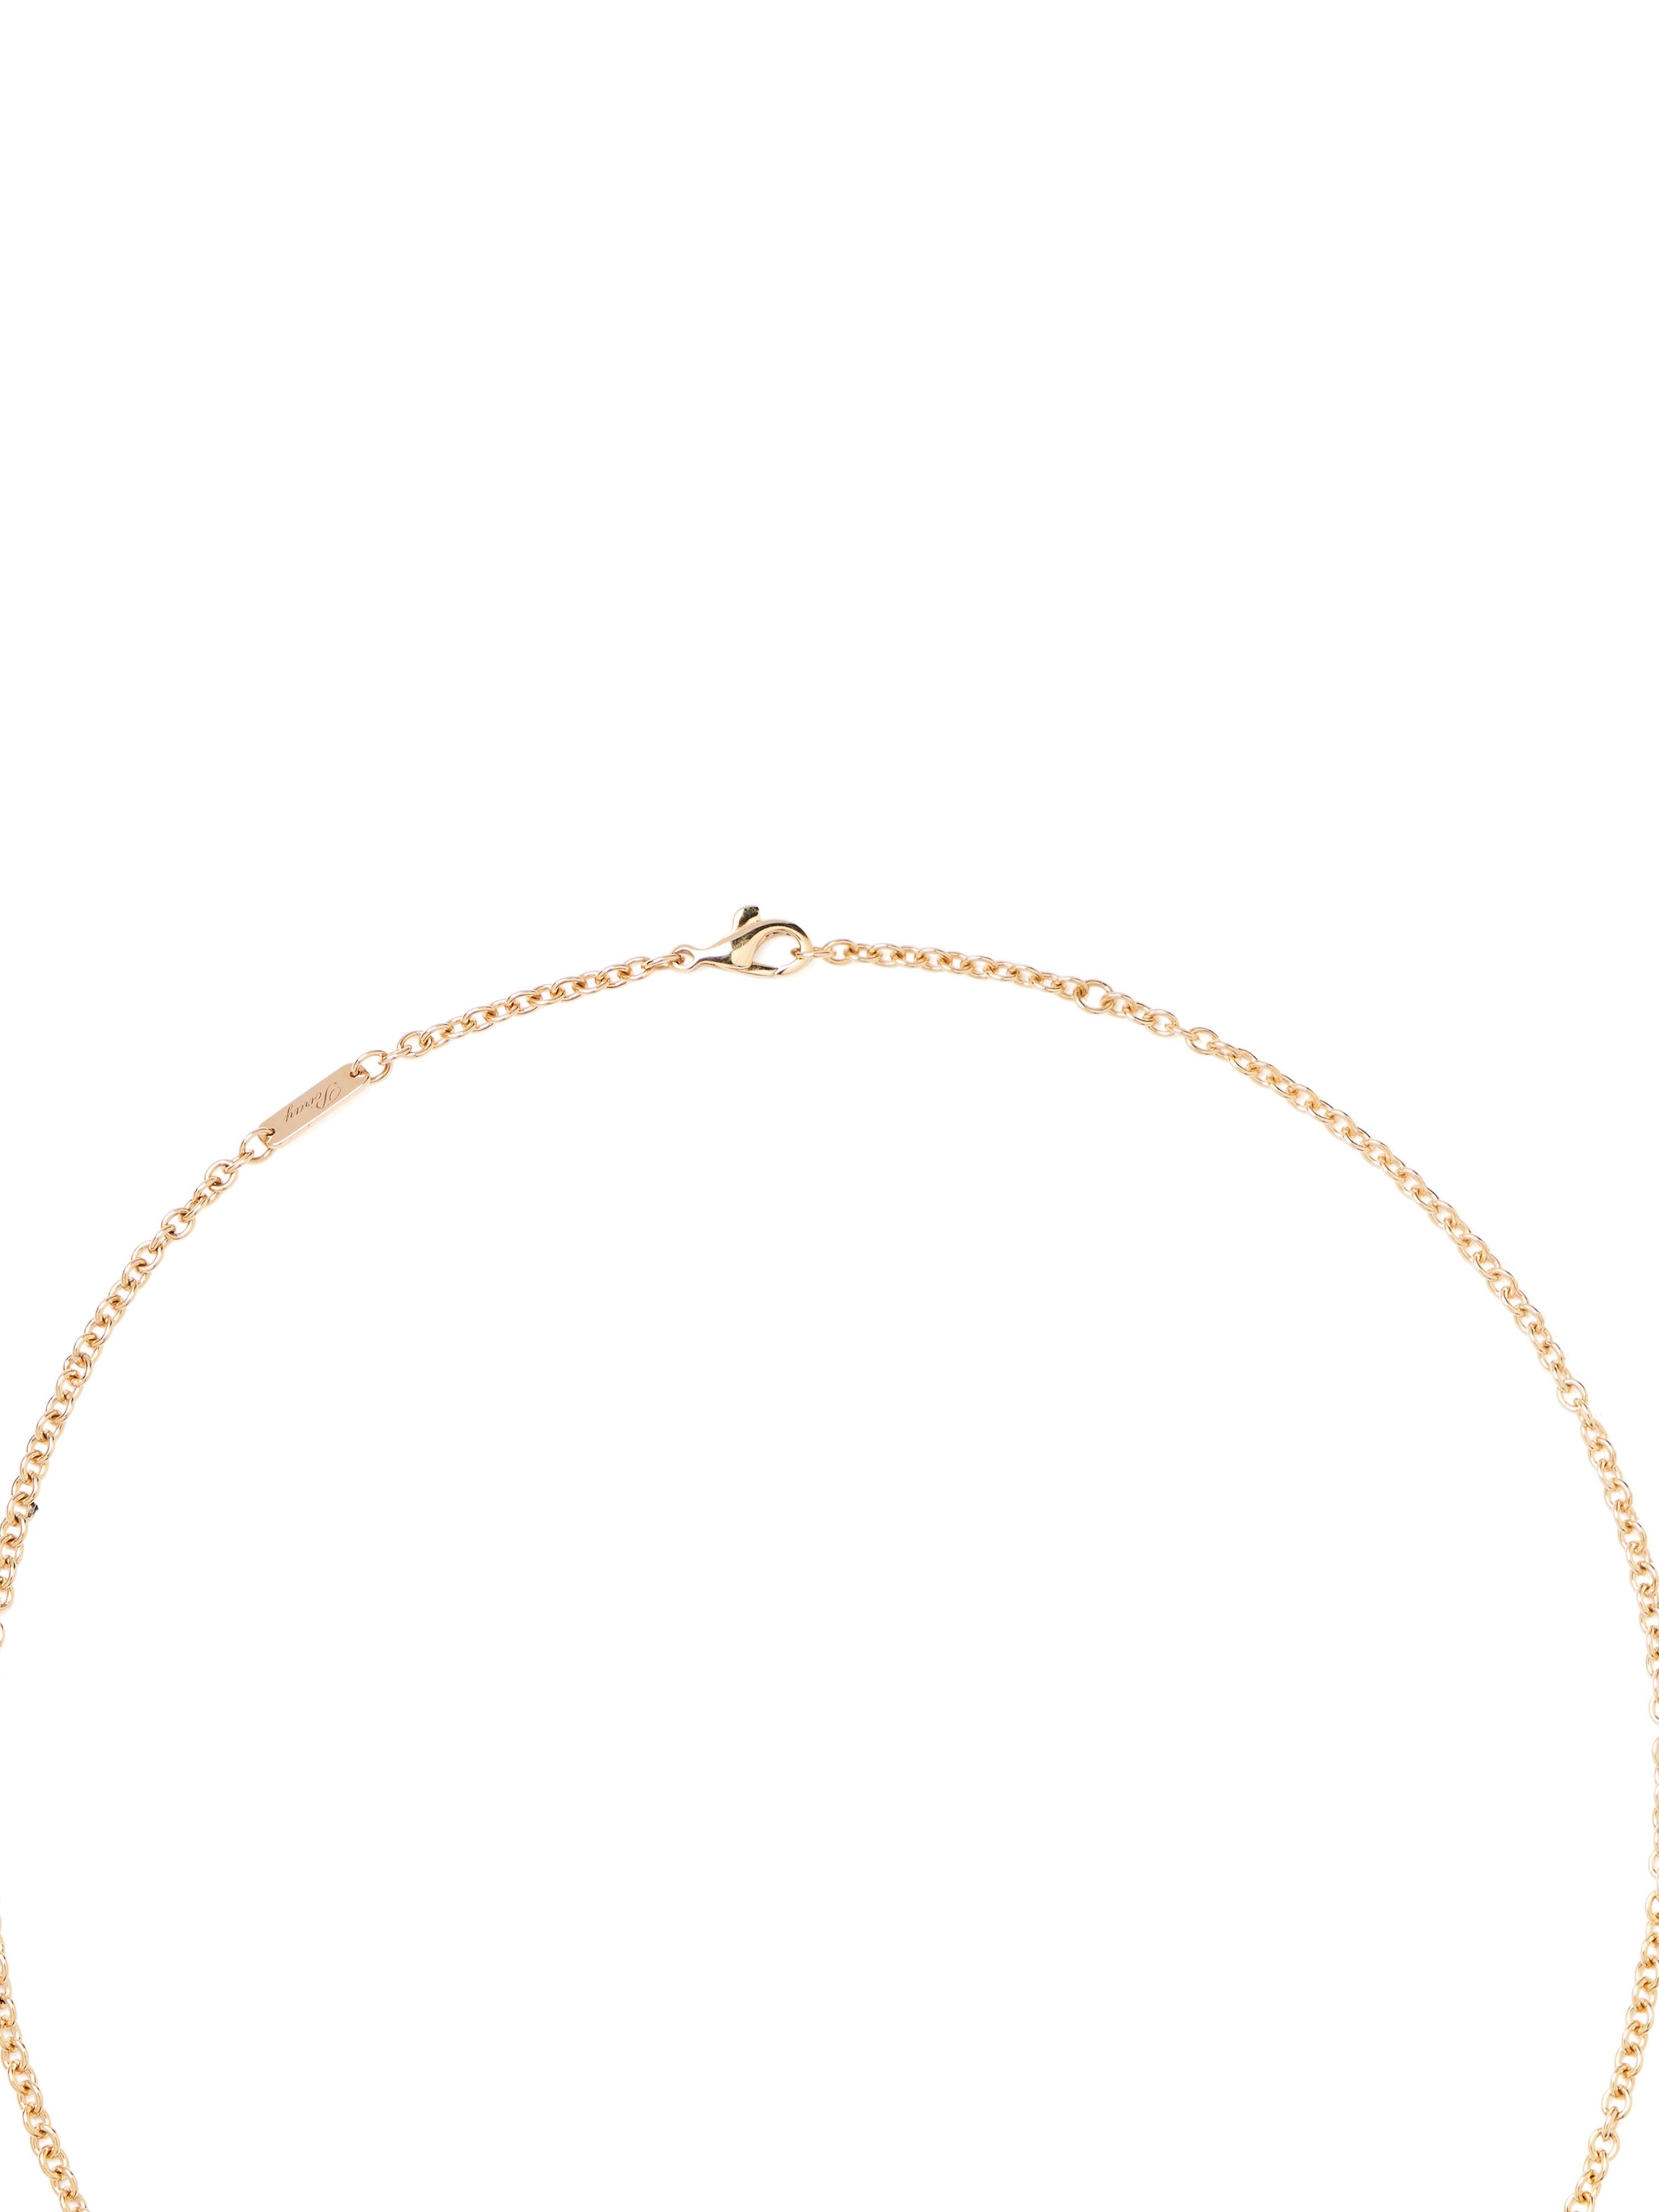 Modern 18 Carat Gold necklace, Yellow Gold, Fine Stones, Lolita Collection For Sale